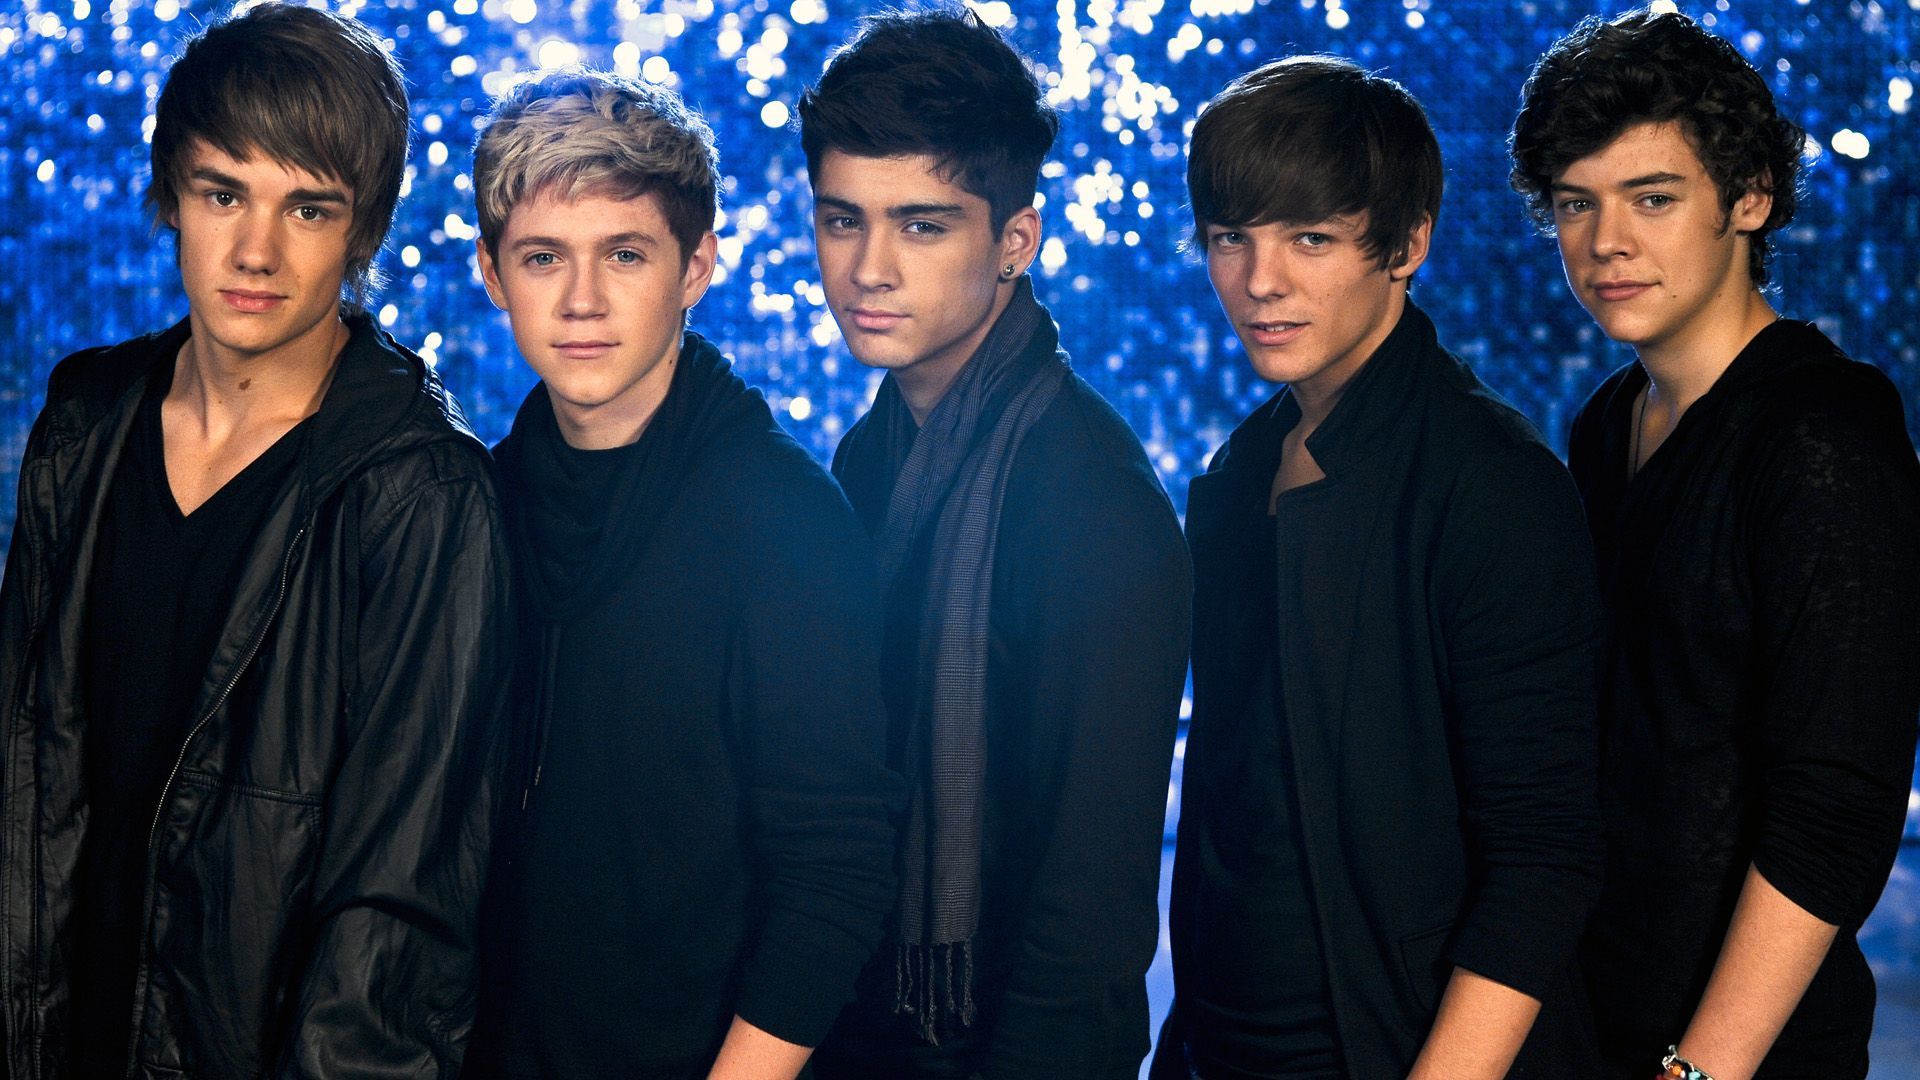 wallpaper gallery One Direction gallery One Direction. One direction wallpaper, One direction image, One direction posters